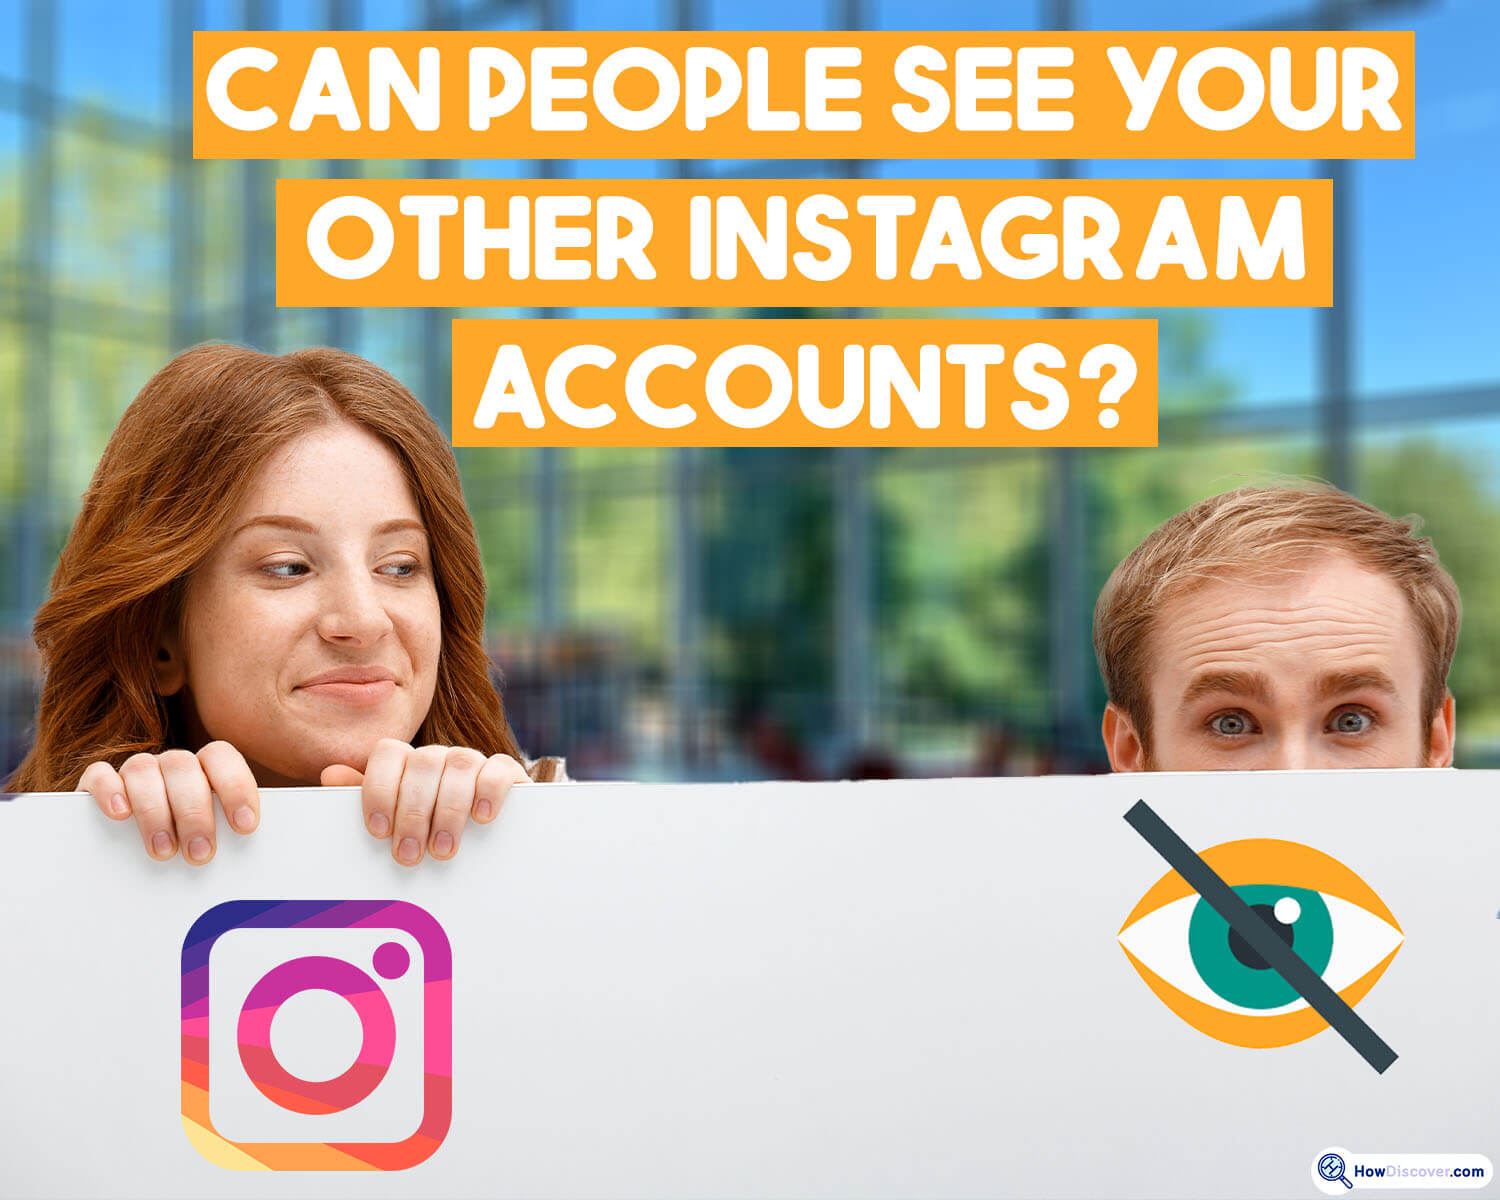 Can people see your other Instagram accounts